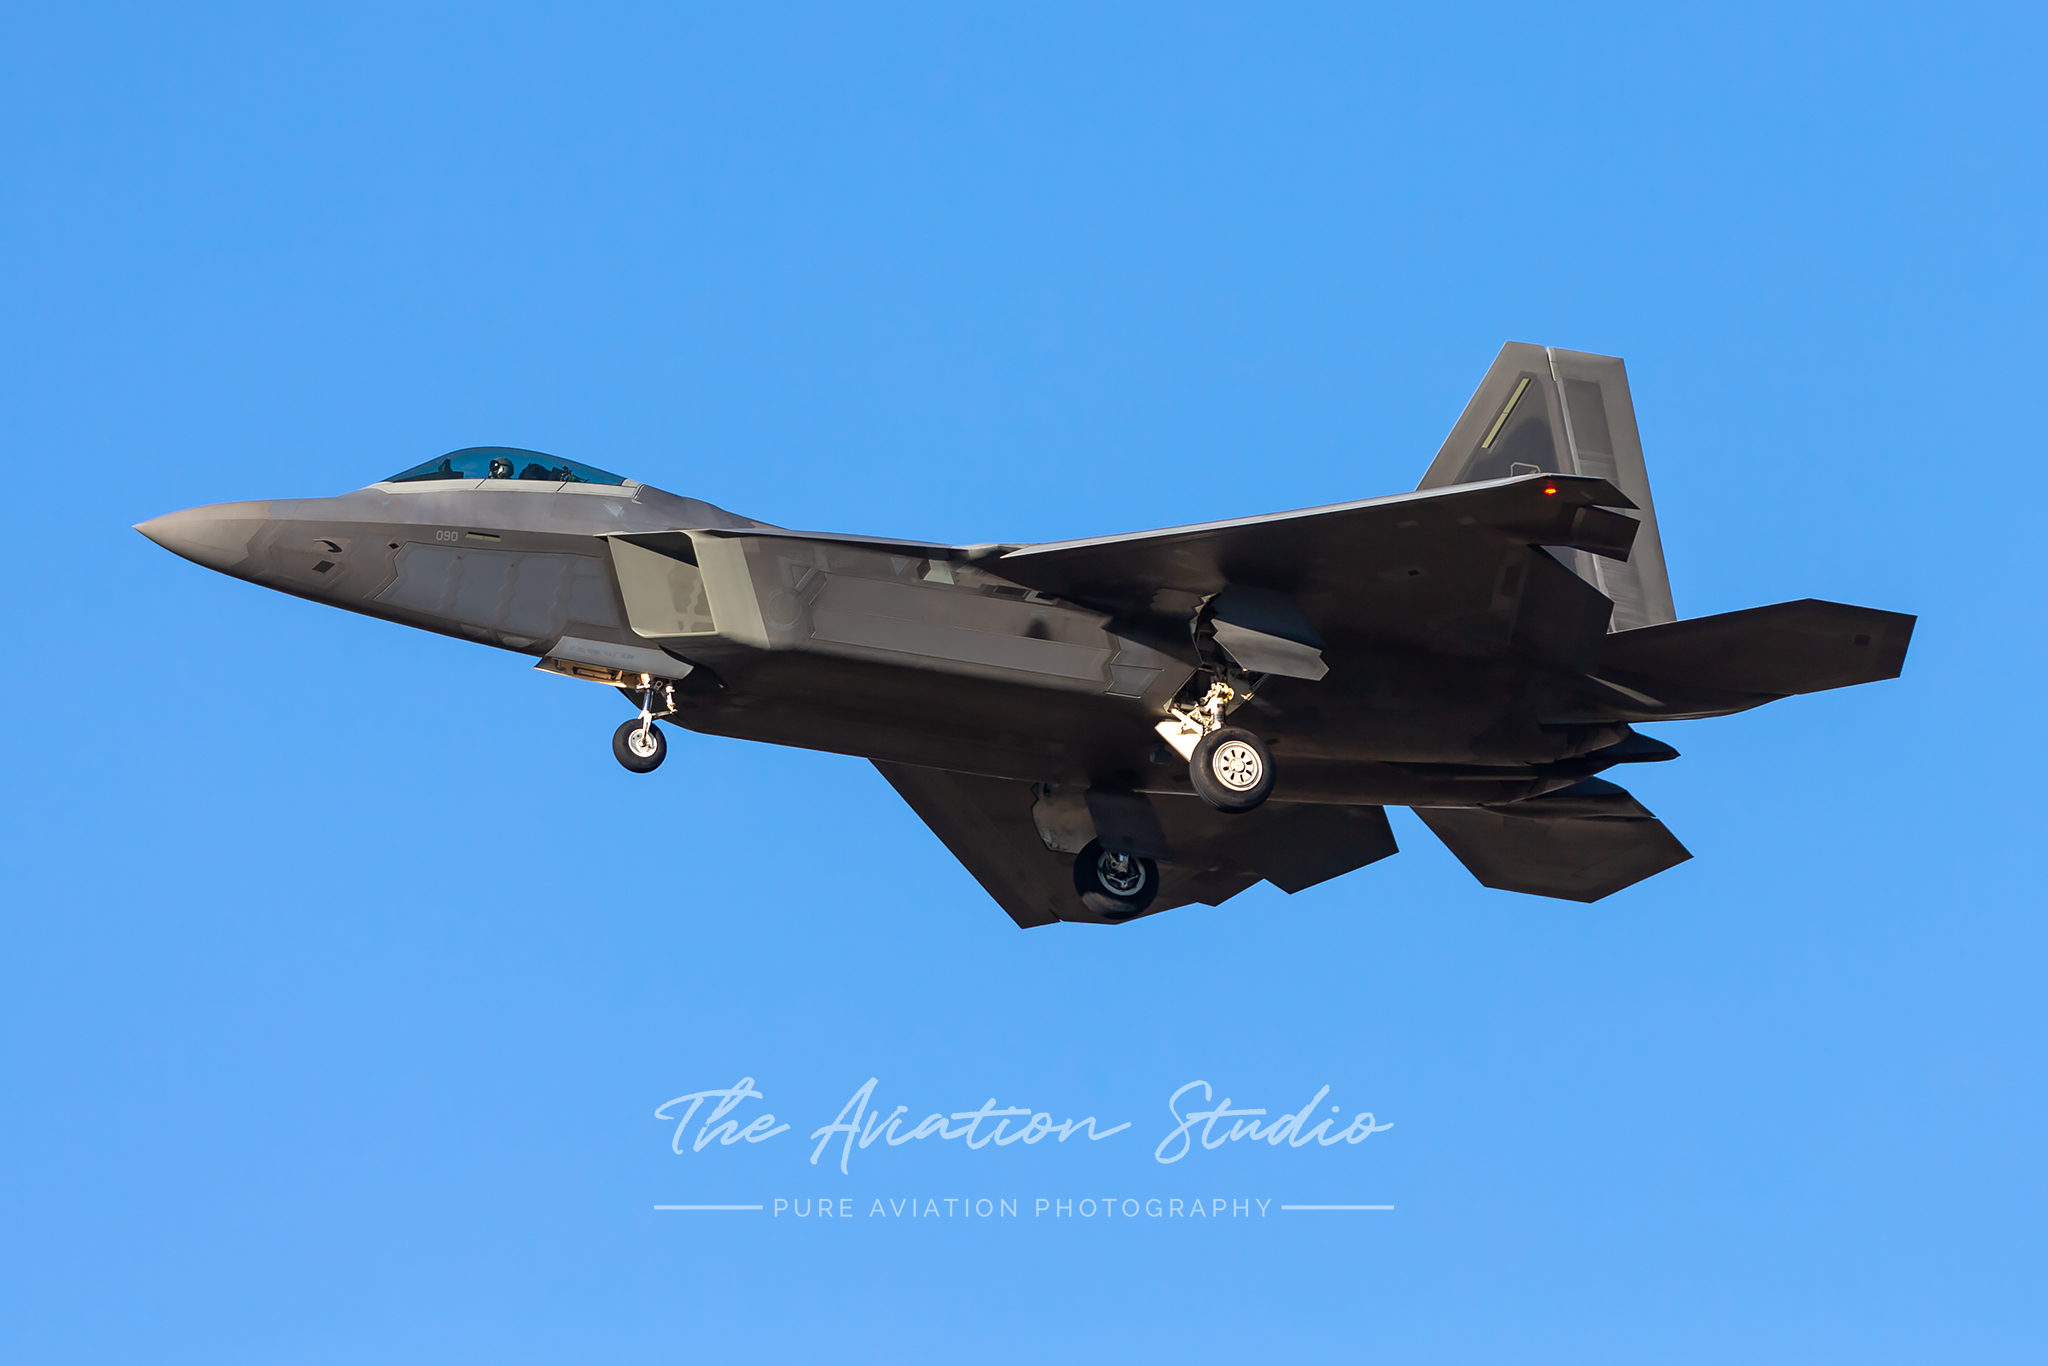 A United States Air Force Lockheed Martin F-22A Raptor 05-4090 about to land RWY33 at RAAF Amberley (Image: Lance Broad)